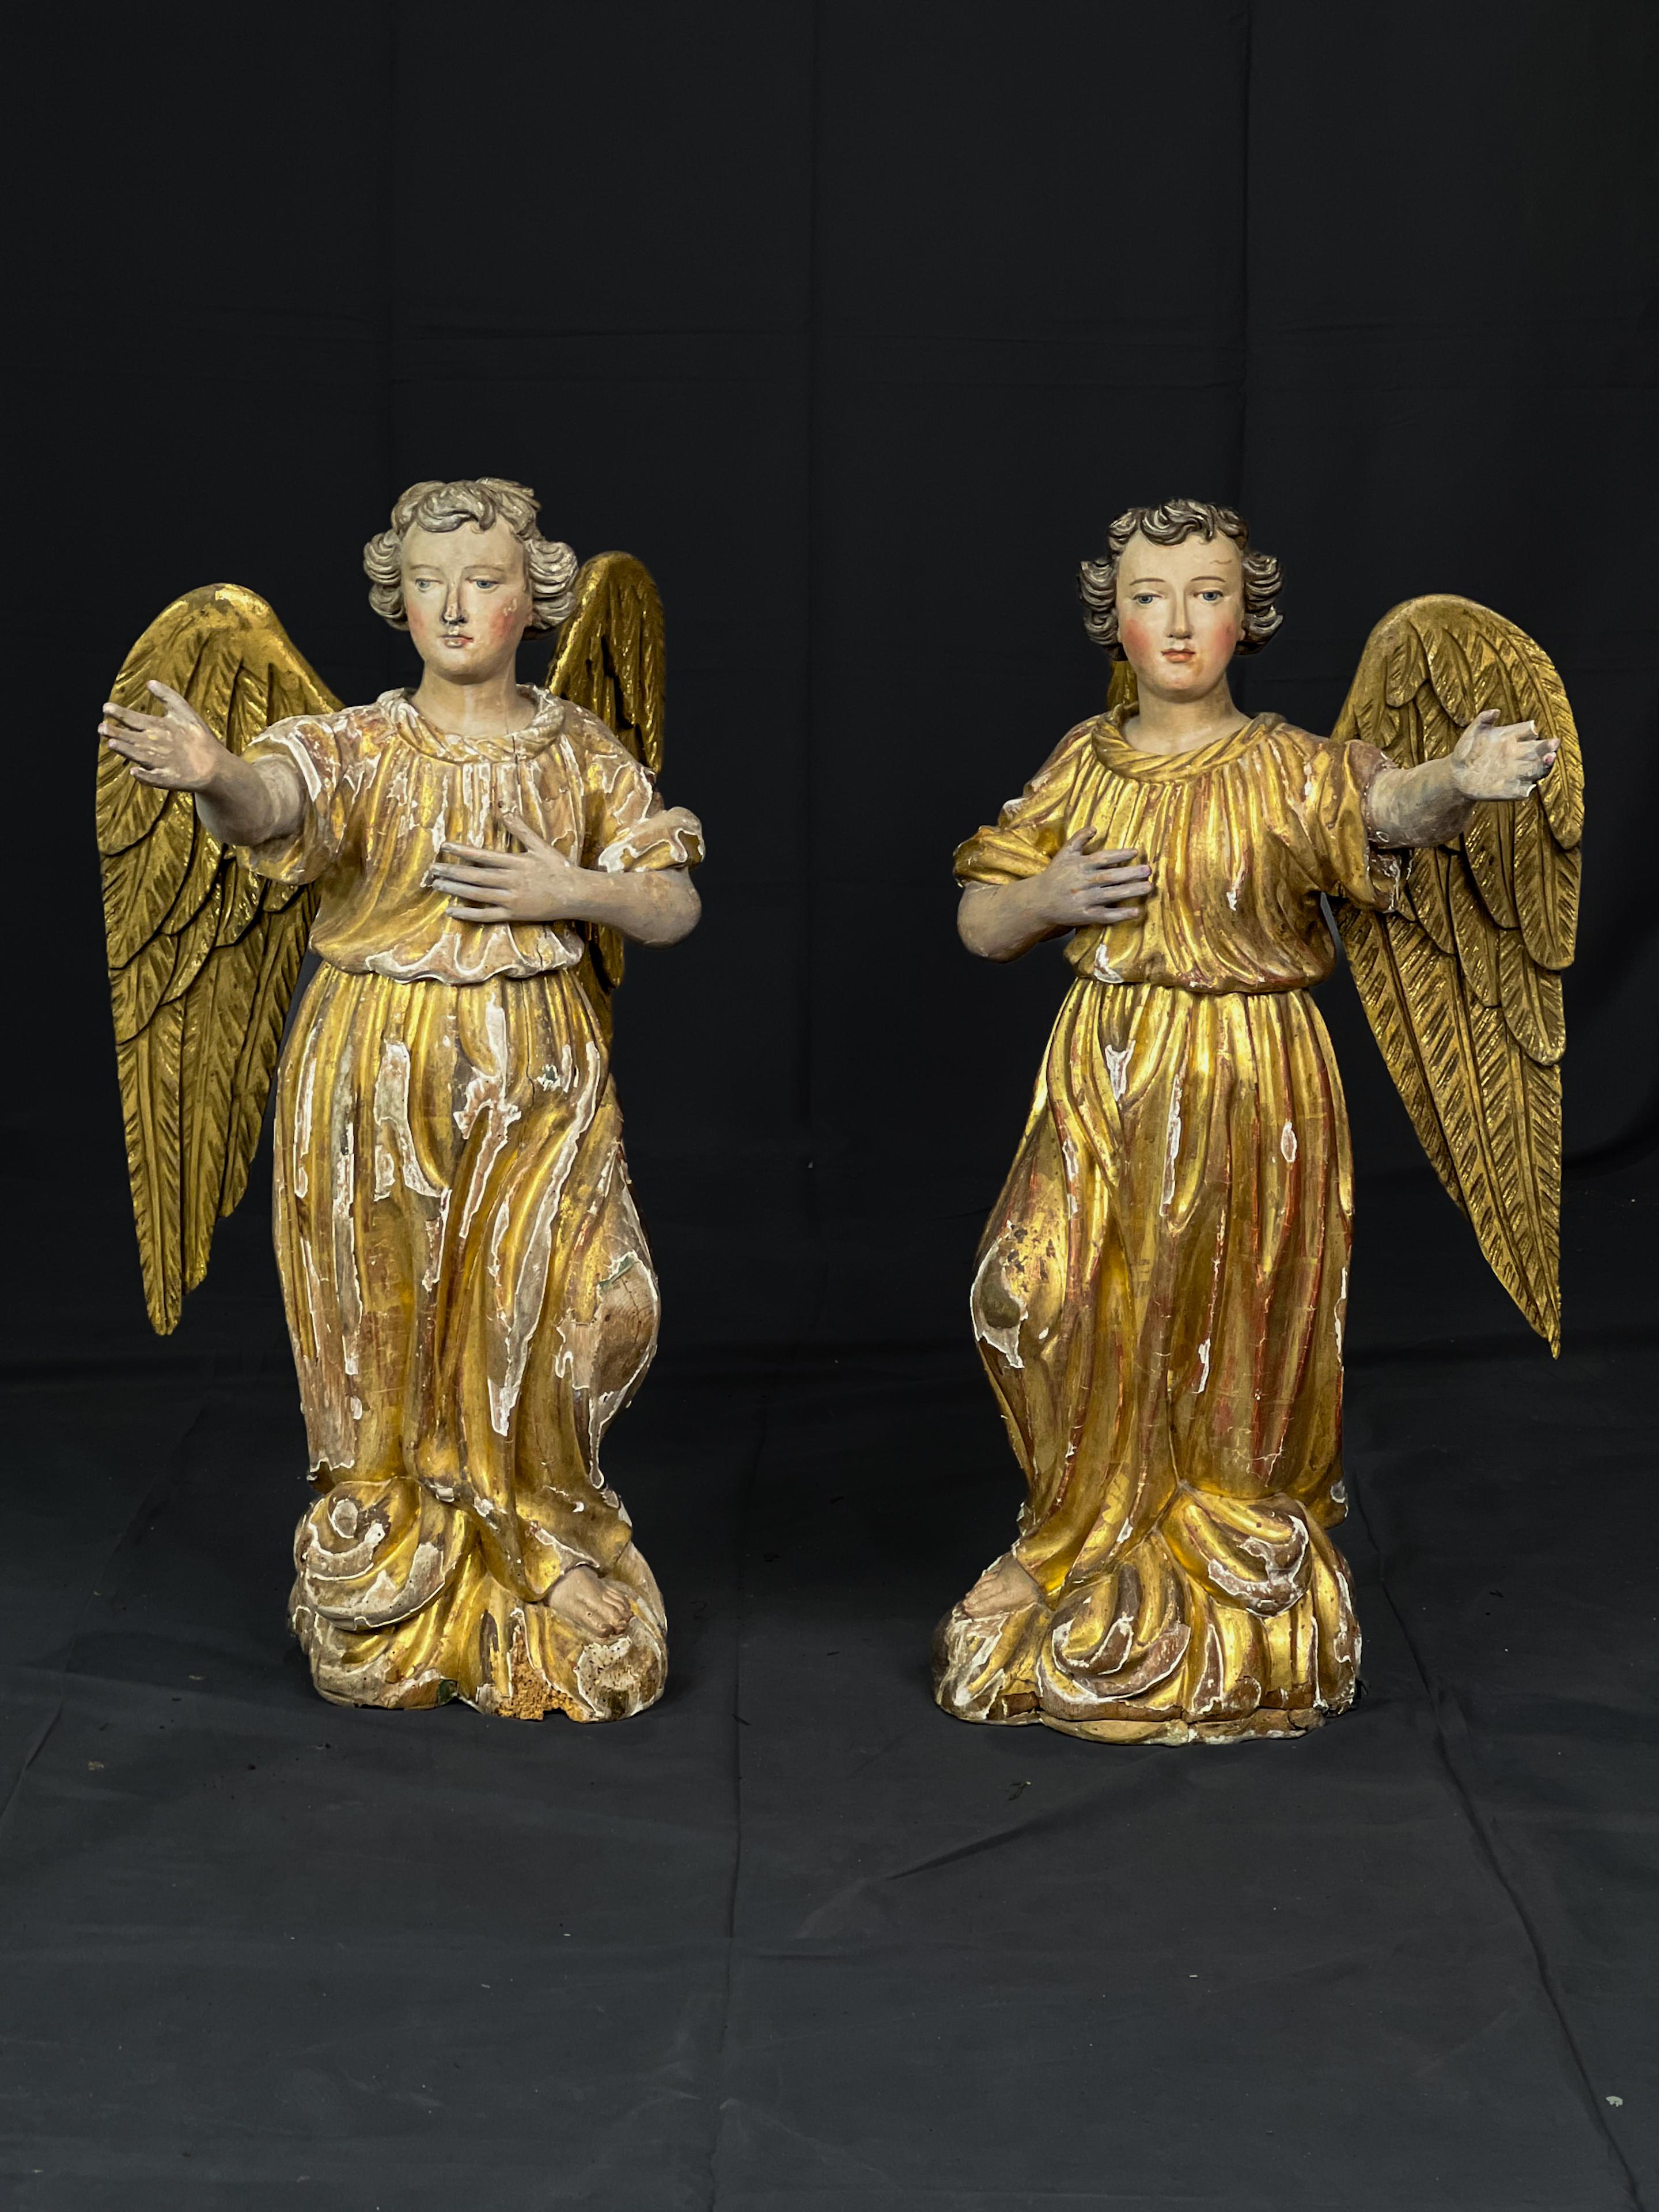 Pair of 18th c. Carved Wood French Angels that have gilded full length robes and wings. The pair have beautiful hand painted facial details. The back of each statue has a metal brace to help support the wings.